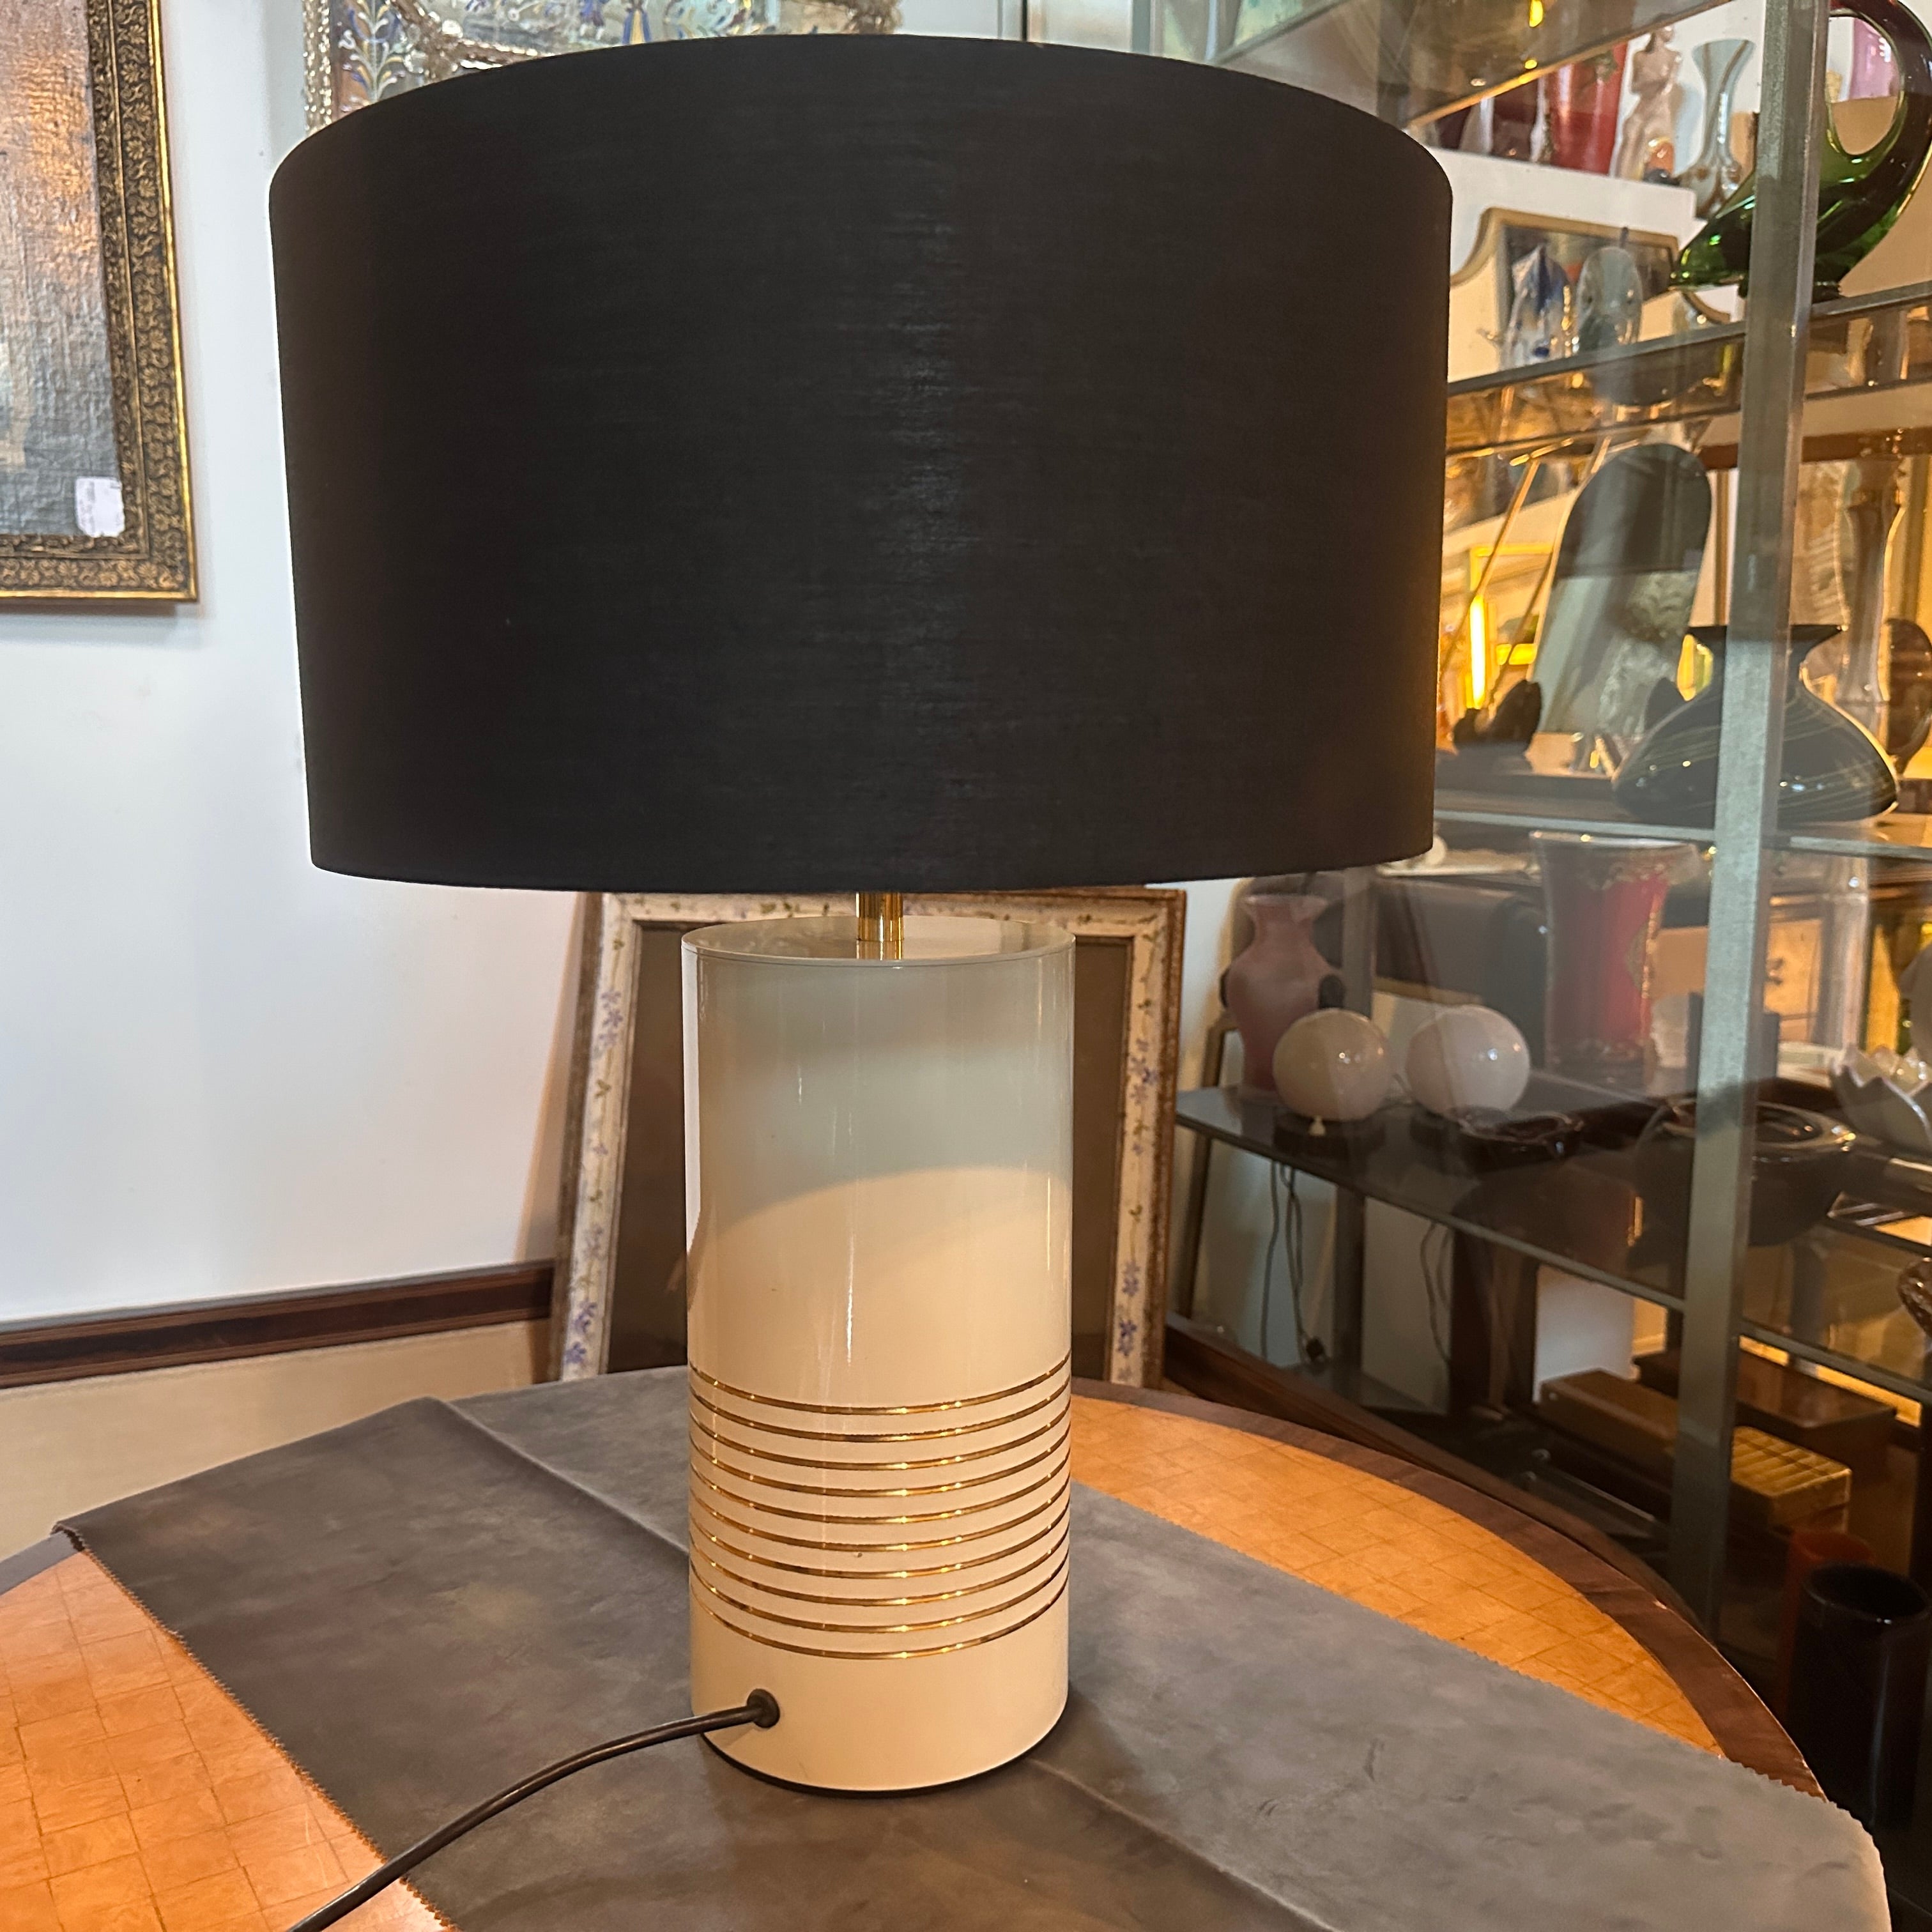 A 1970s mid-century table lamp designed and manufactured in Italy in the style of Tommaso Barbi, 
A cylinder-shaped lamp with a sleek and elegant design it's characteristic of this period.
The lamp is made of metal painted in ivory, gold circular